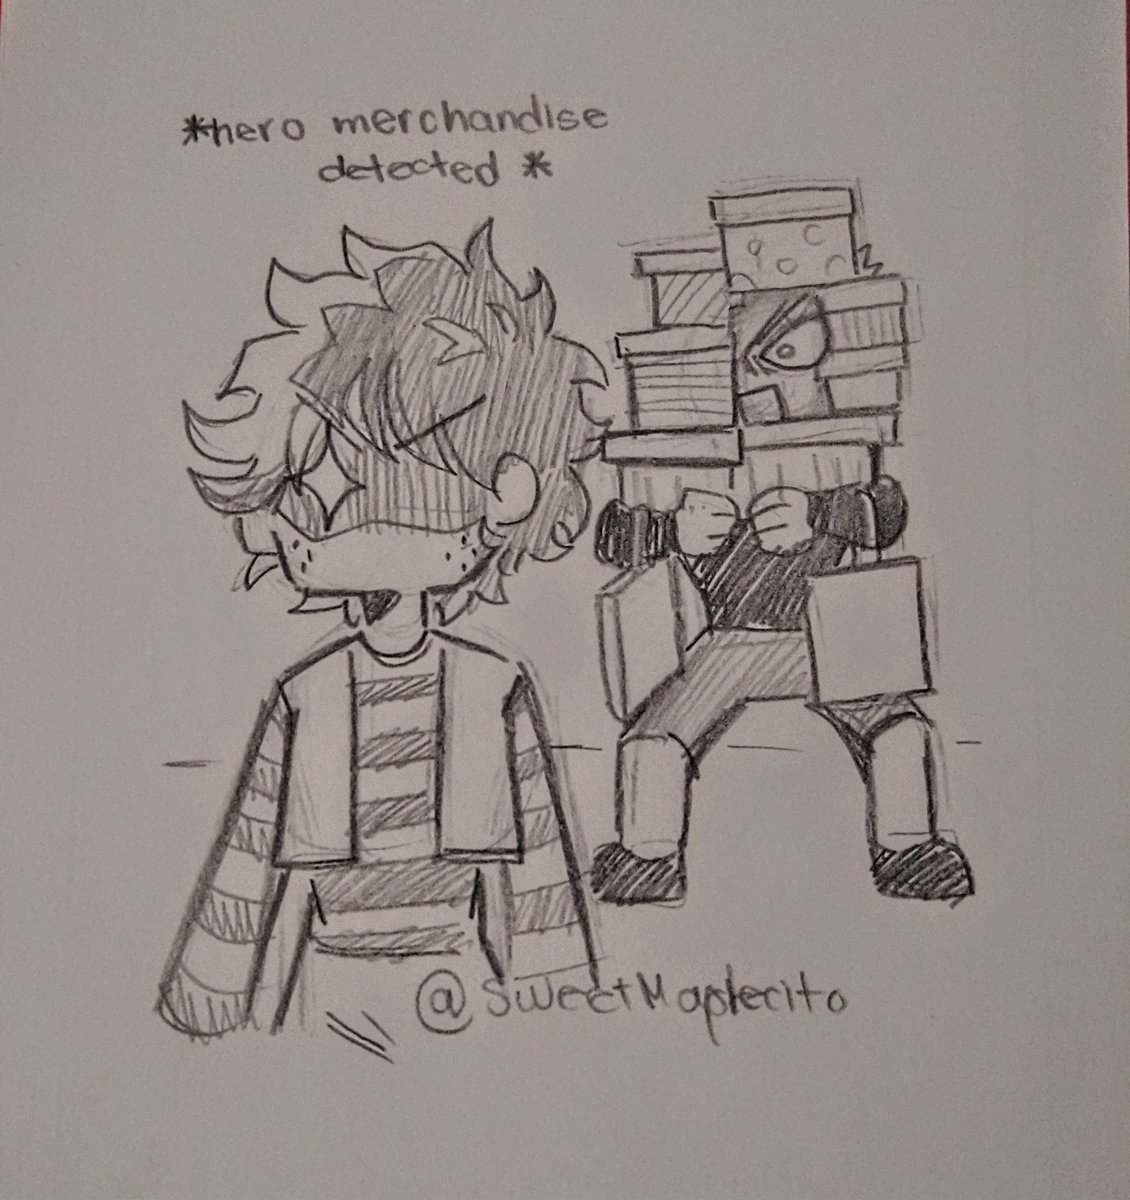 Day 3: Getting lost somewhere
'Izuku goes crazy when it comes to hero merchandise'